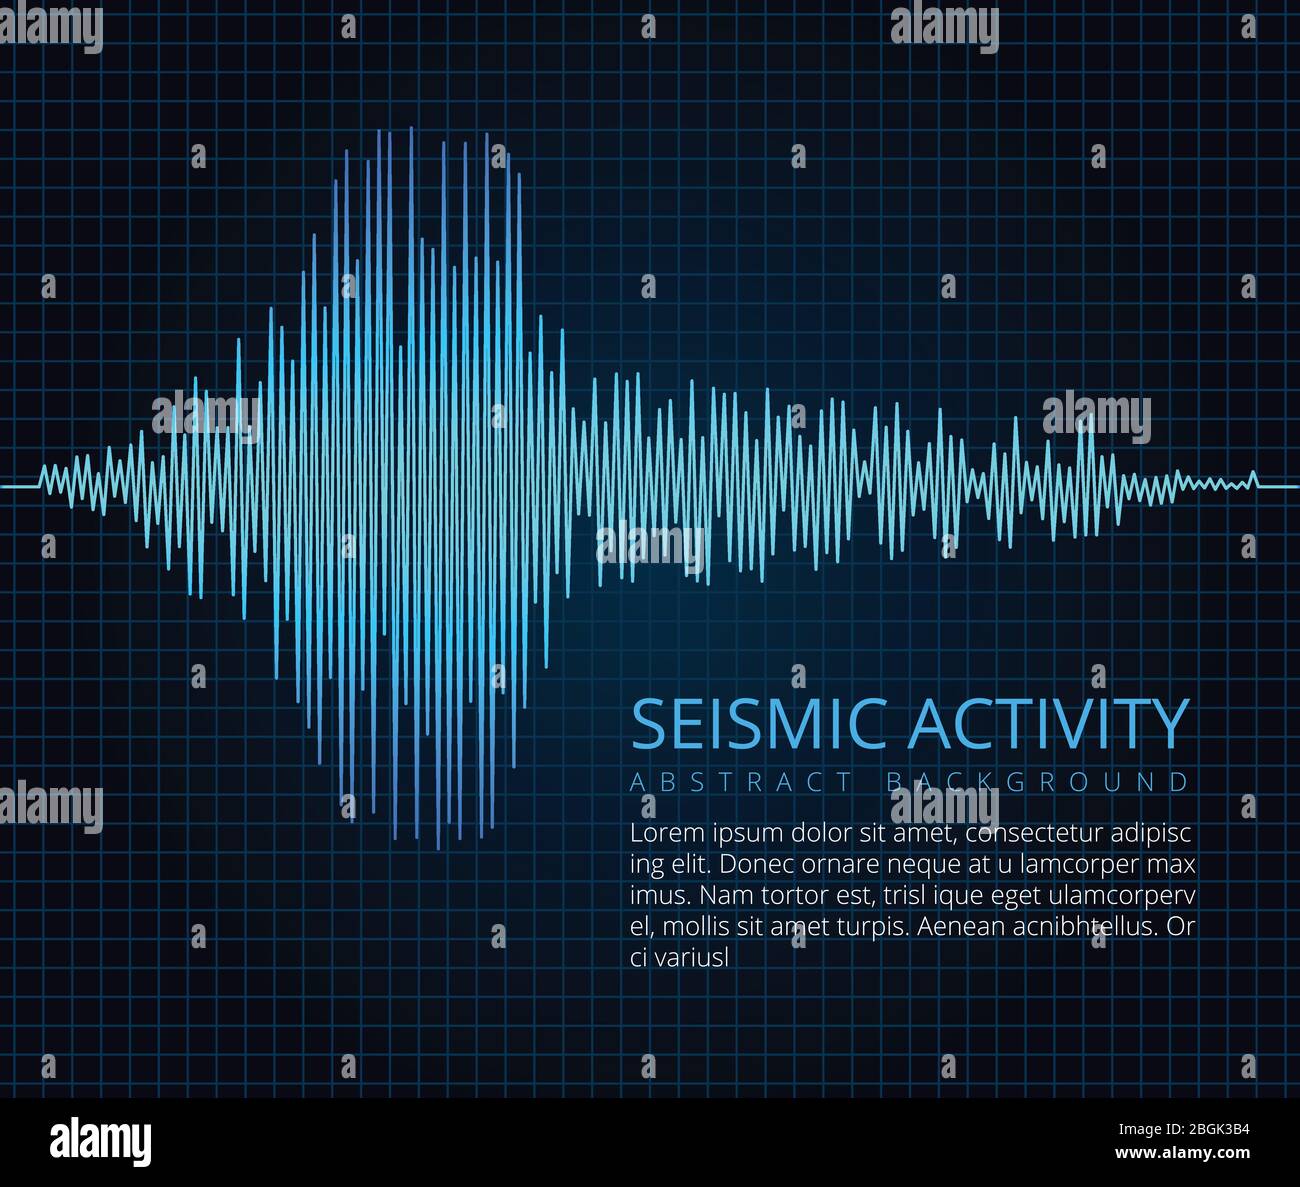 Earthquake frequency wave graph, seismic activity. Vector abstract scientific background. Diagram seismograph, vibration amplitude illustration Stock Vector